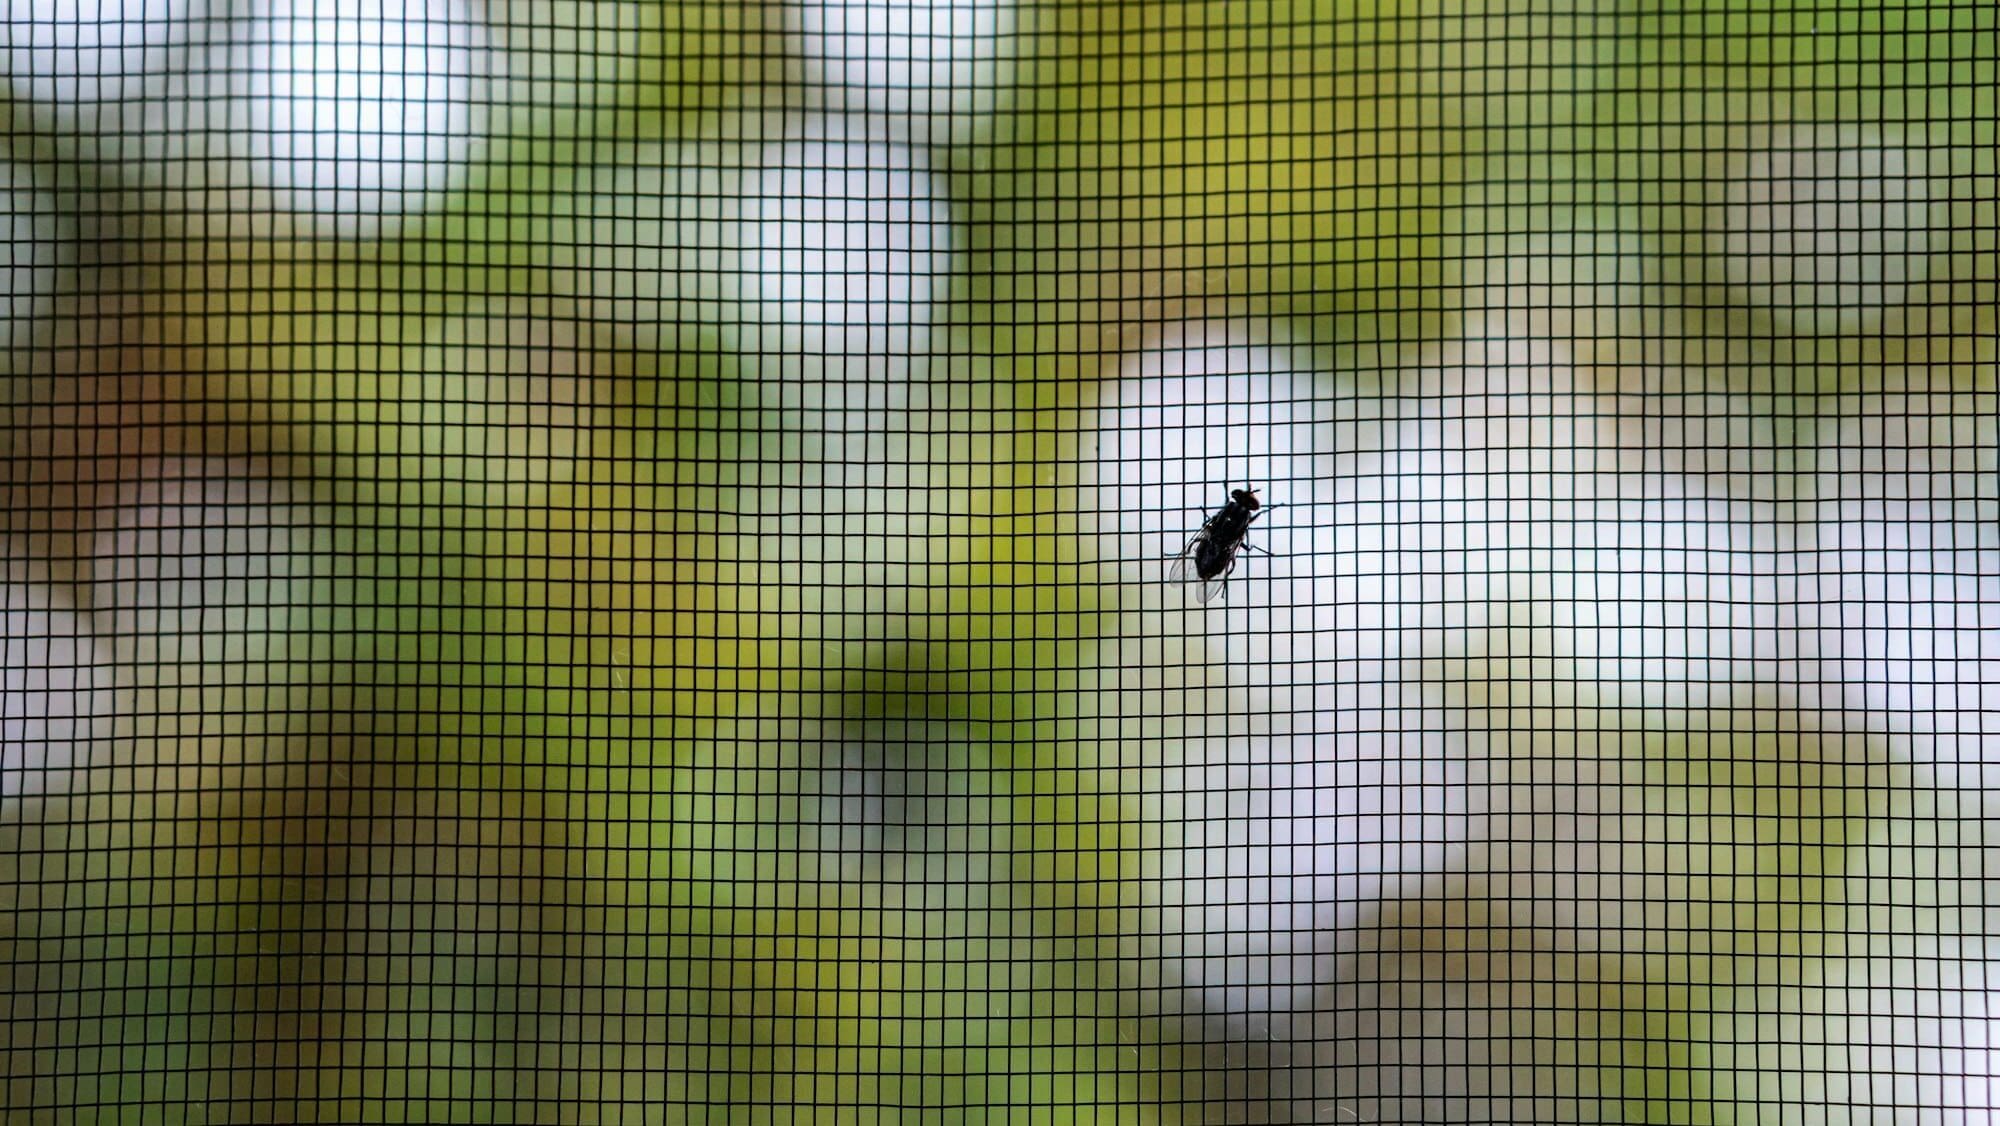 Closeup of a fly on the mesh patterned protective window screen